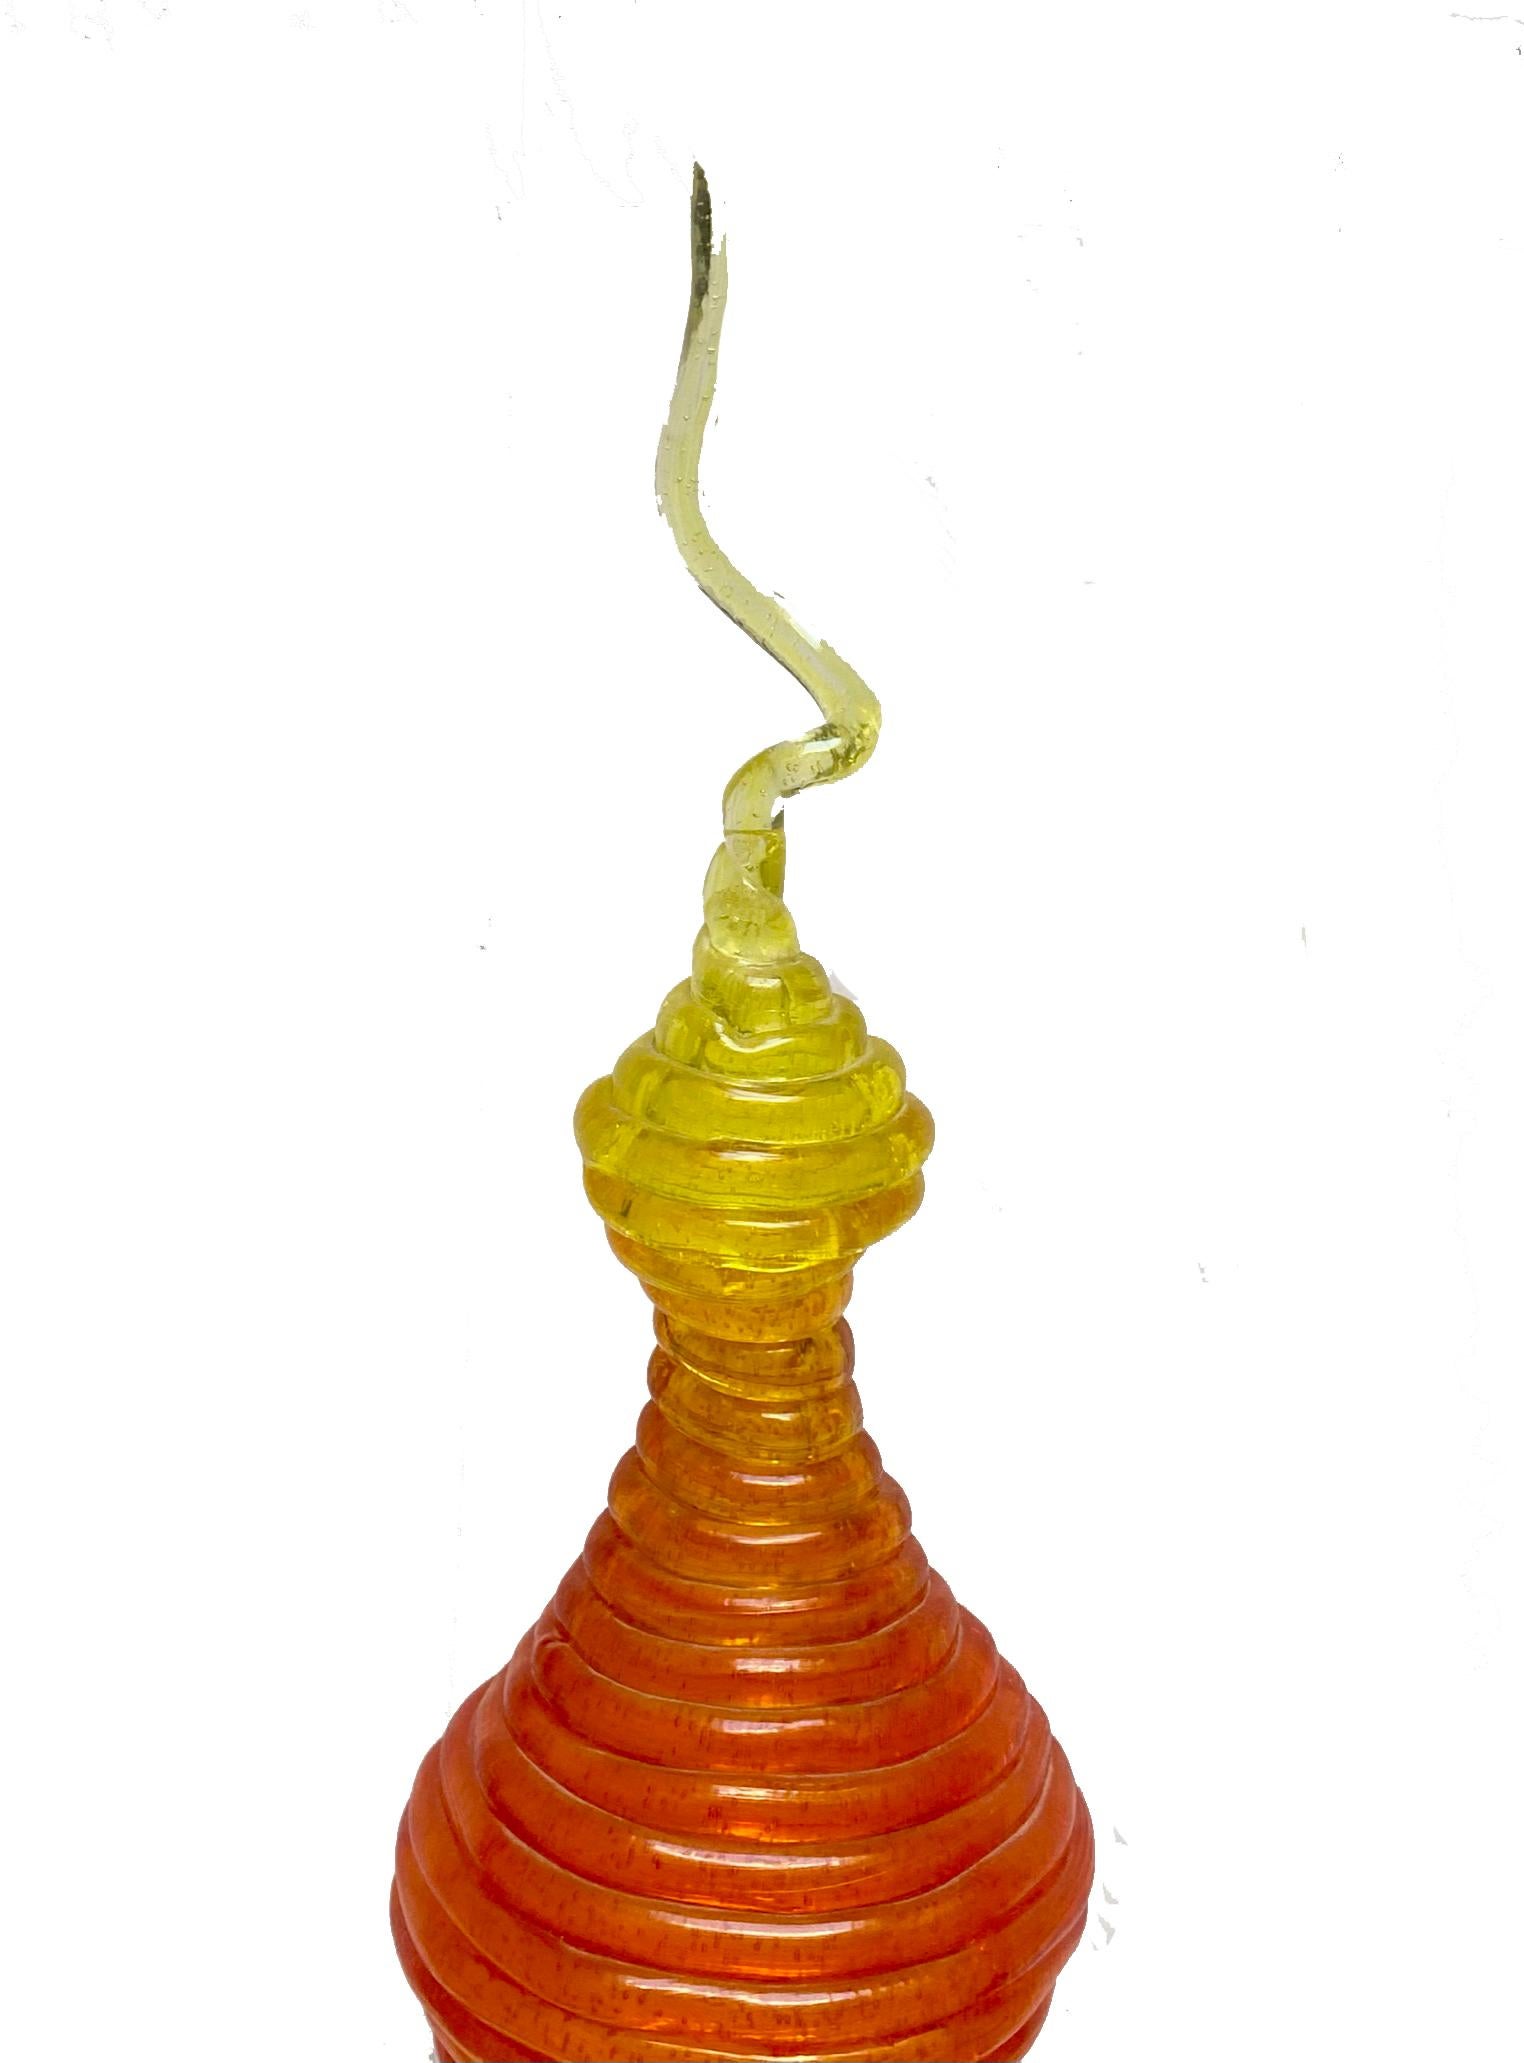 Unique illuminated object, circa 1997. Made by Jacopo Foggini, Milan. Methacrylate, yellow, orange and red

The designer melts methacrylate in a self-designed machine. With it, he developes strands he shapes and joins with his own hands.